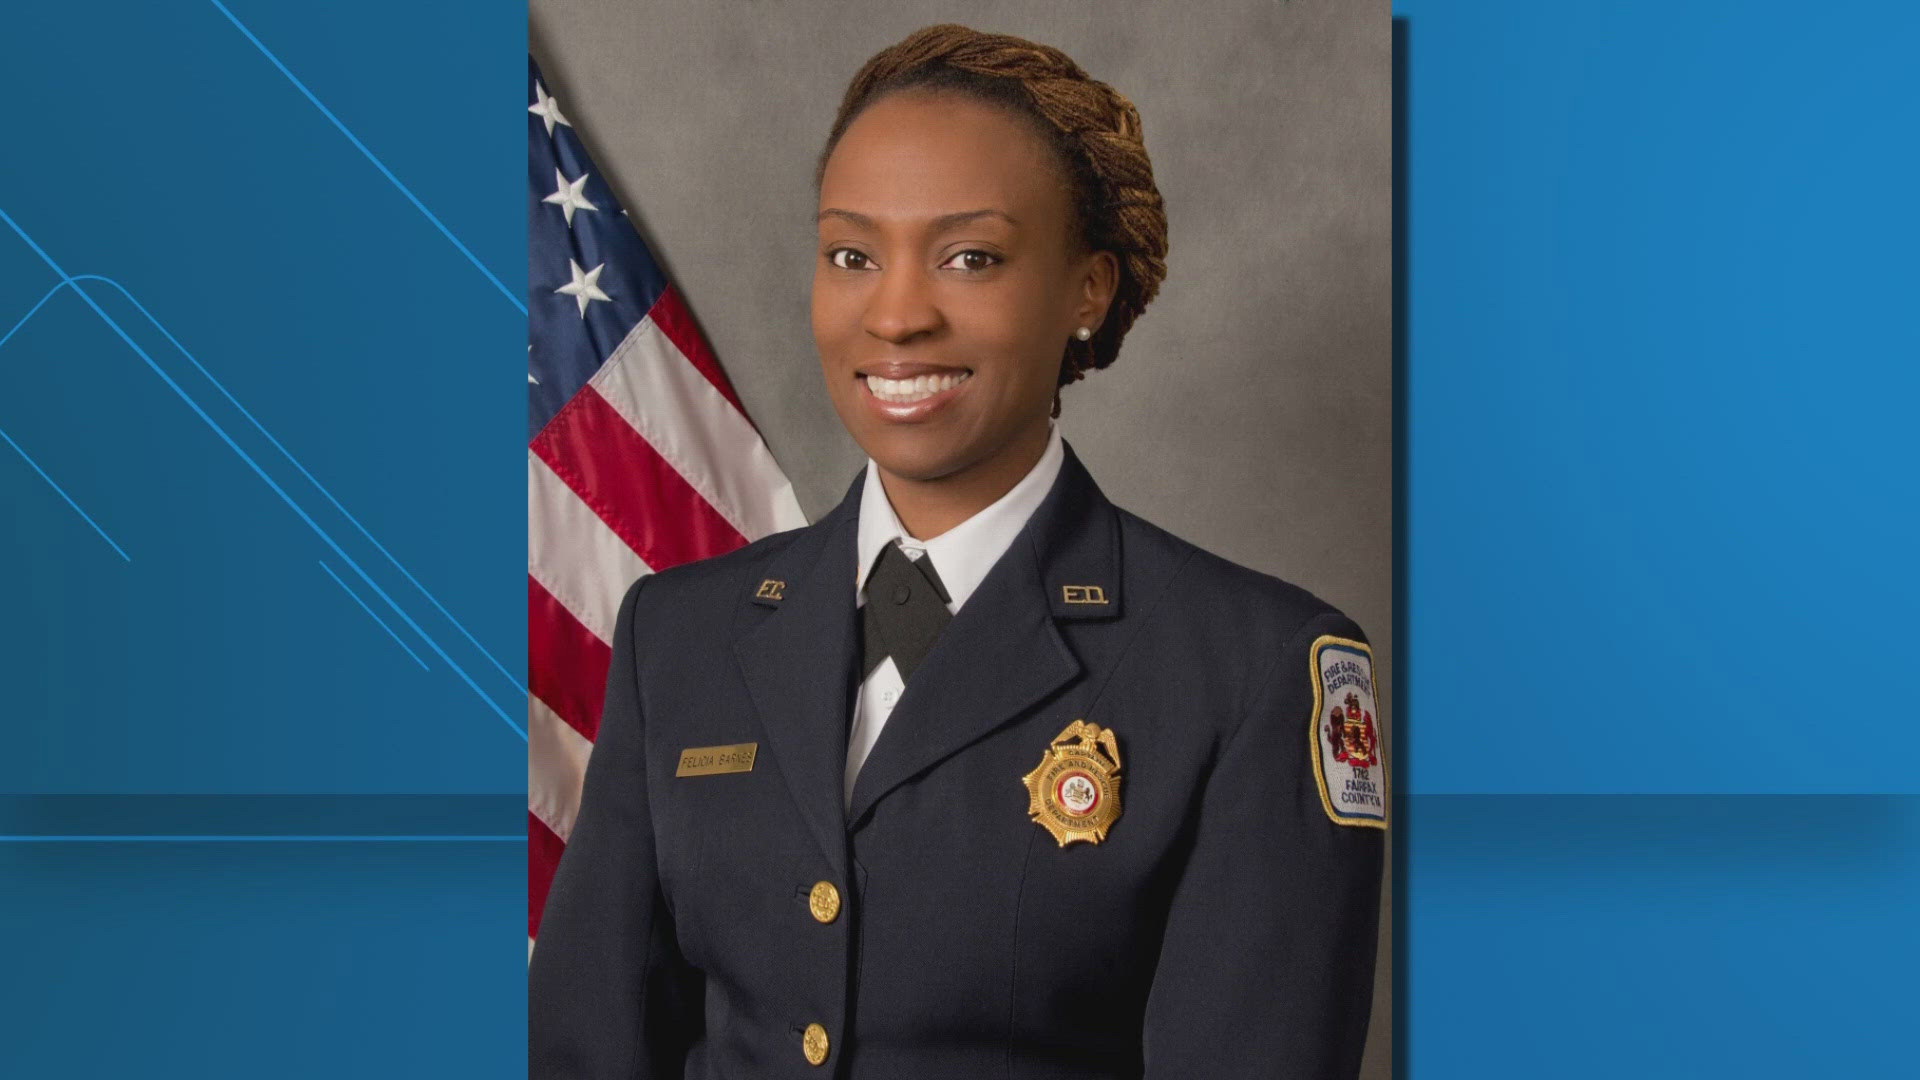 Battalion Chief Felicia Barnes has worked with Fairfax County Fire and Rescue for over 21 years. Before becoming a firefighter, she was a police officer.